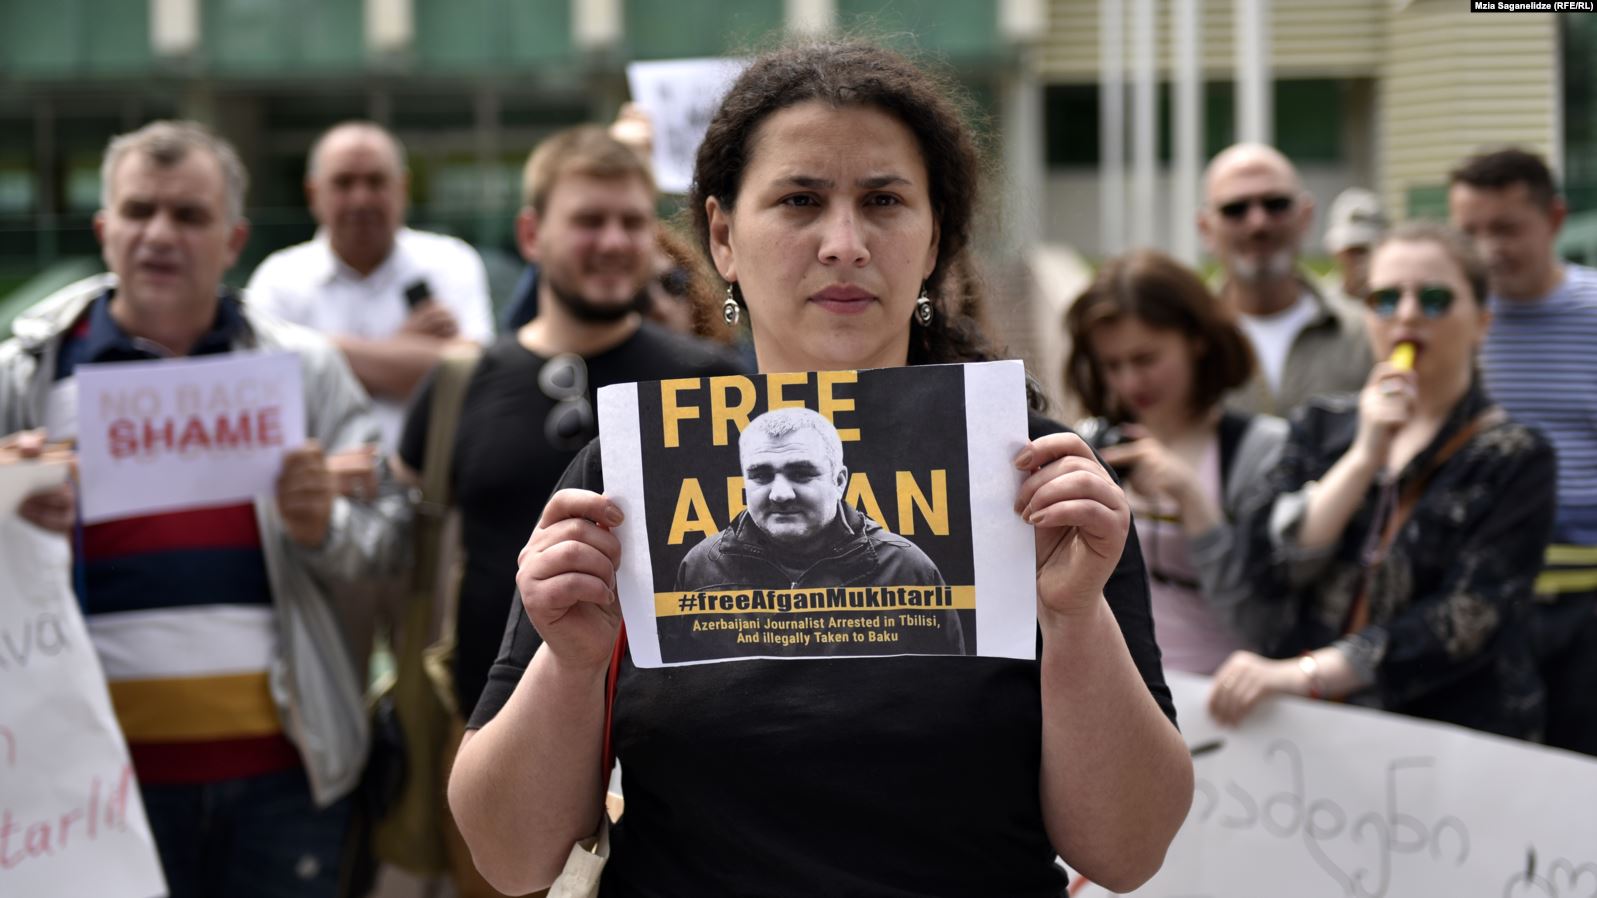 Project Exile: Wife of kidnapped Azerbaijani journalist puts her career on hold to campaign for her husband’s release